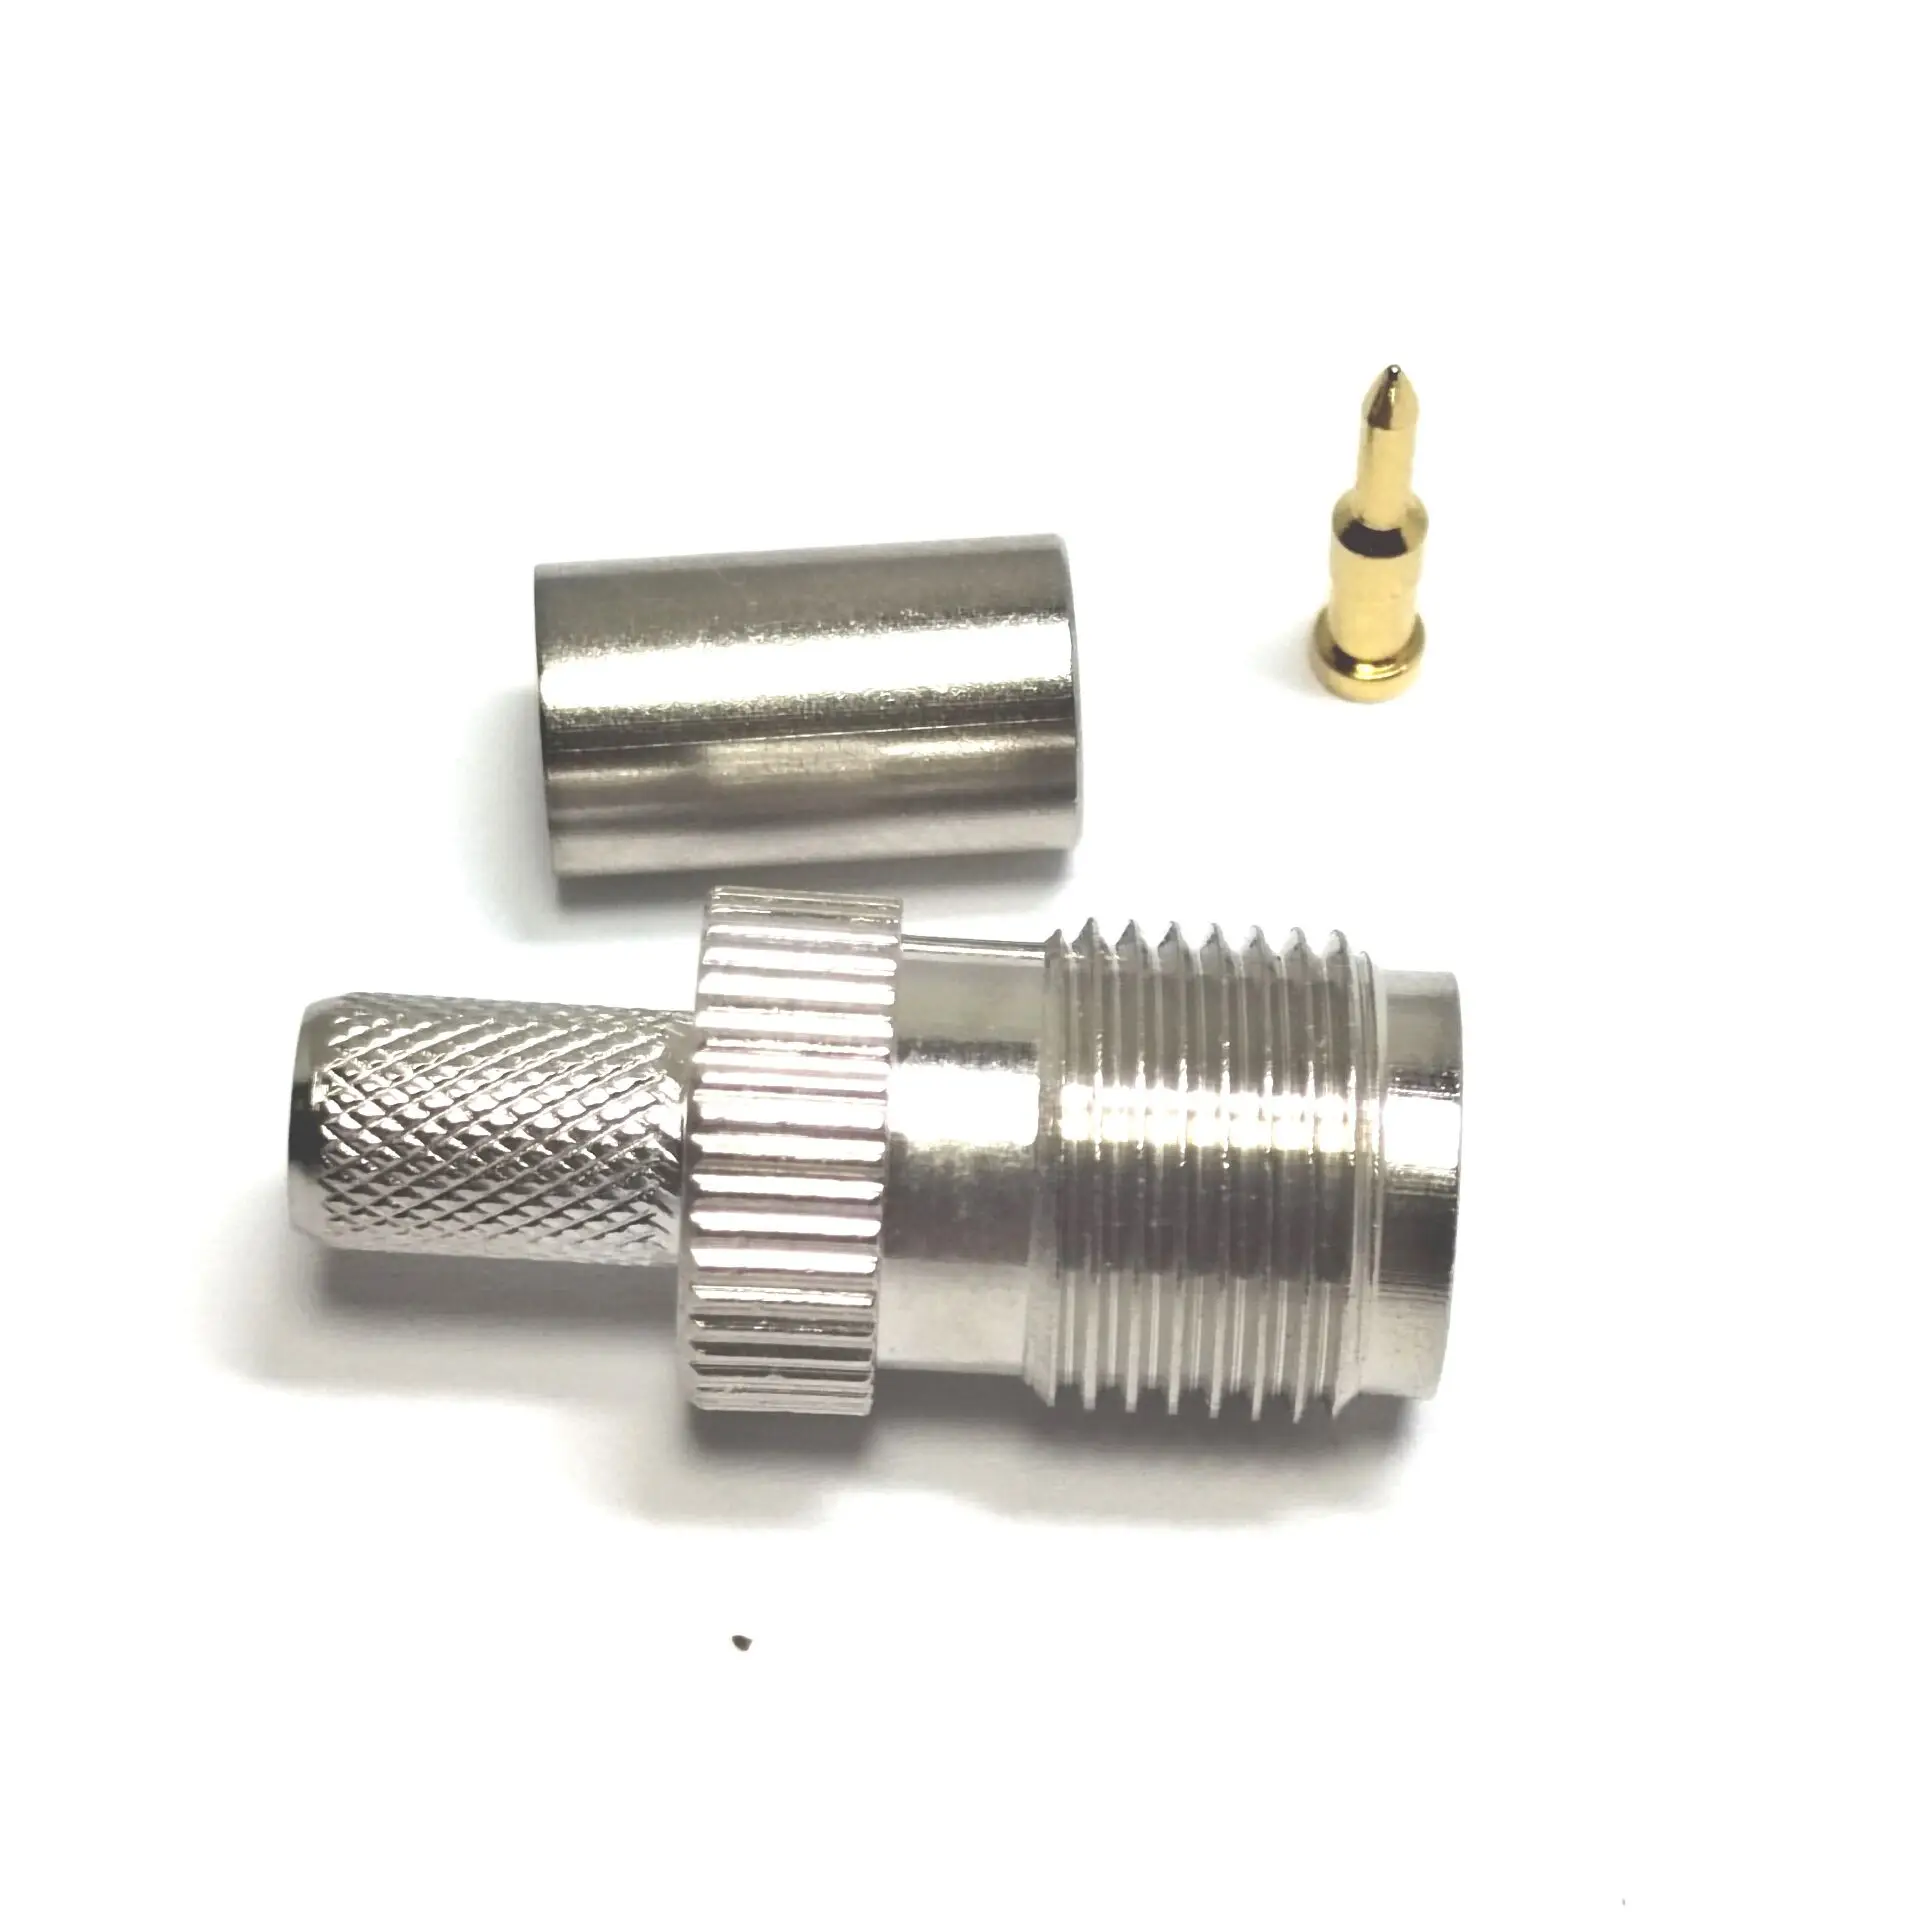 Nickel plated RP Tnc female jack  lmr240 H155 cable  crimp straight Reverse polarity RF coax  connector details